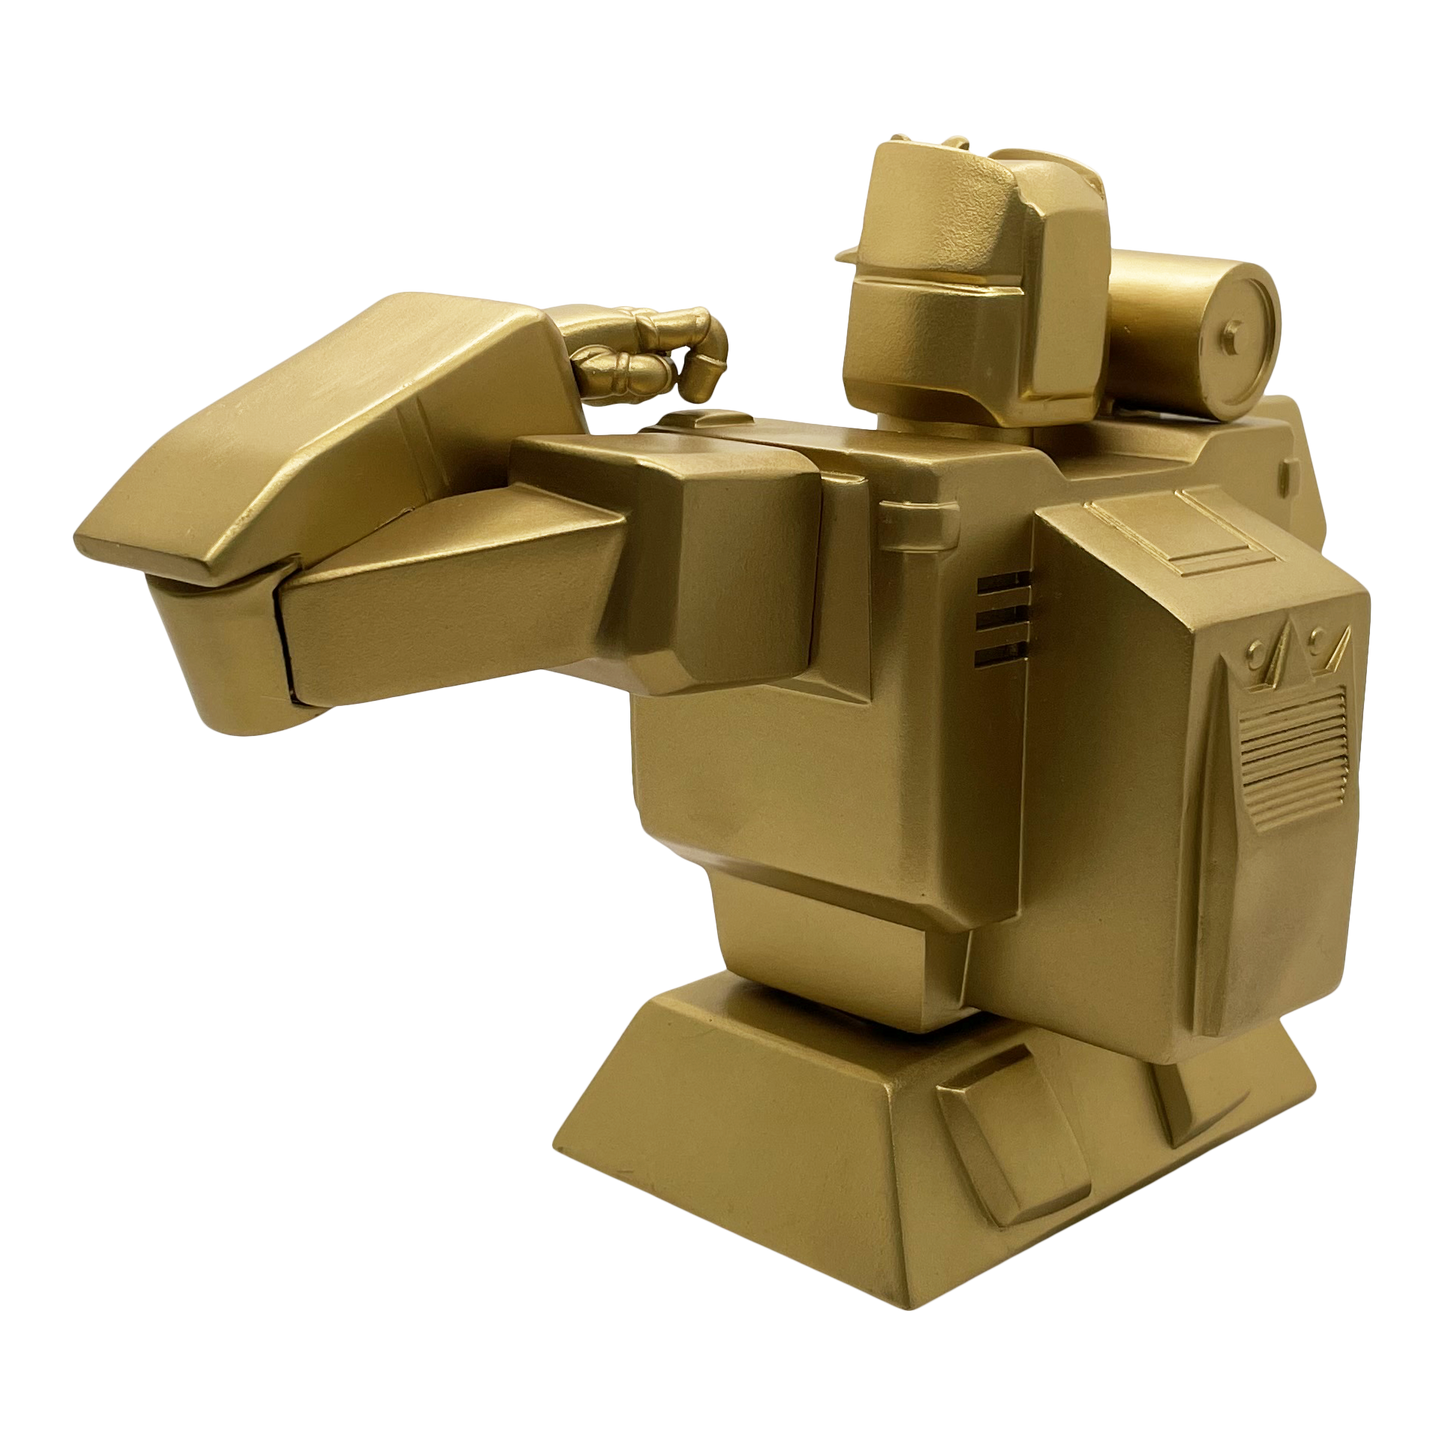 Transformers Golden Lagoon Soundwave Bust Card Holder - Icon Heroes 